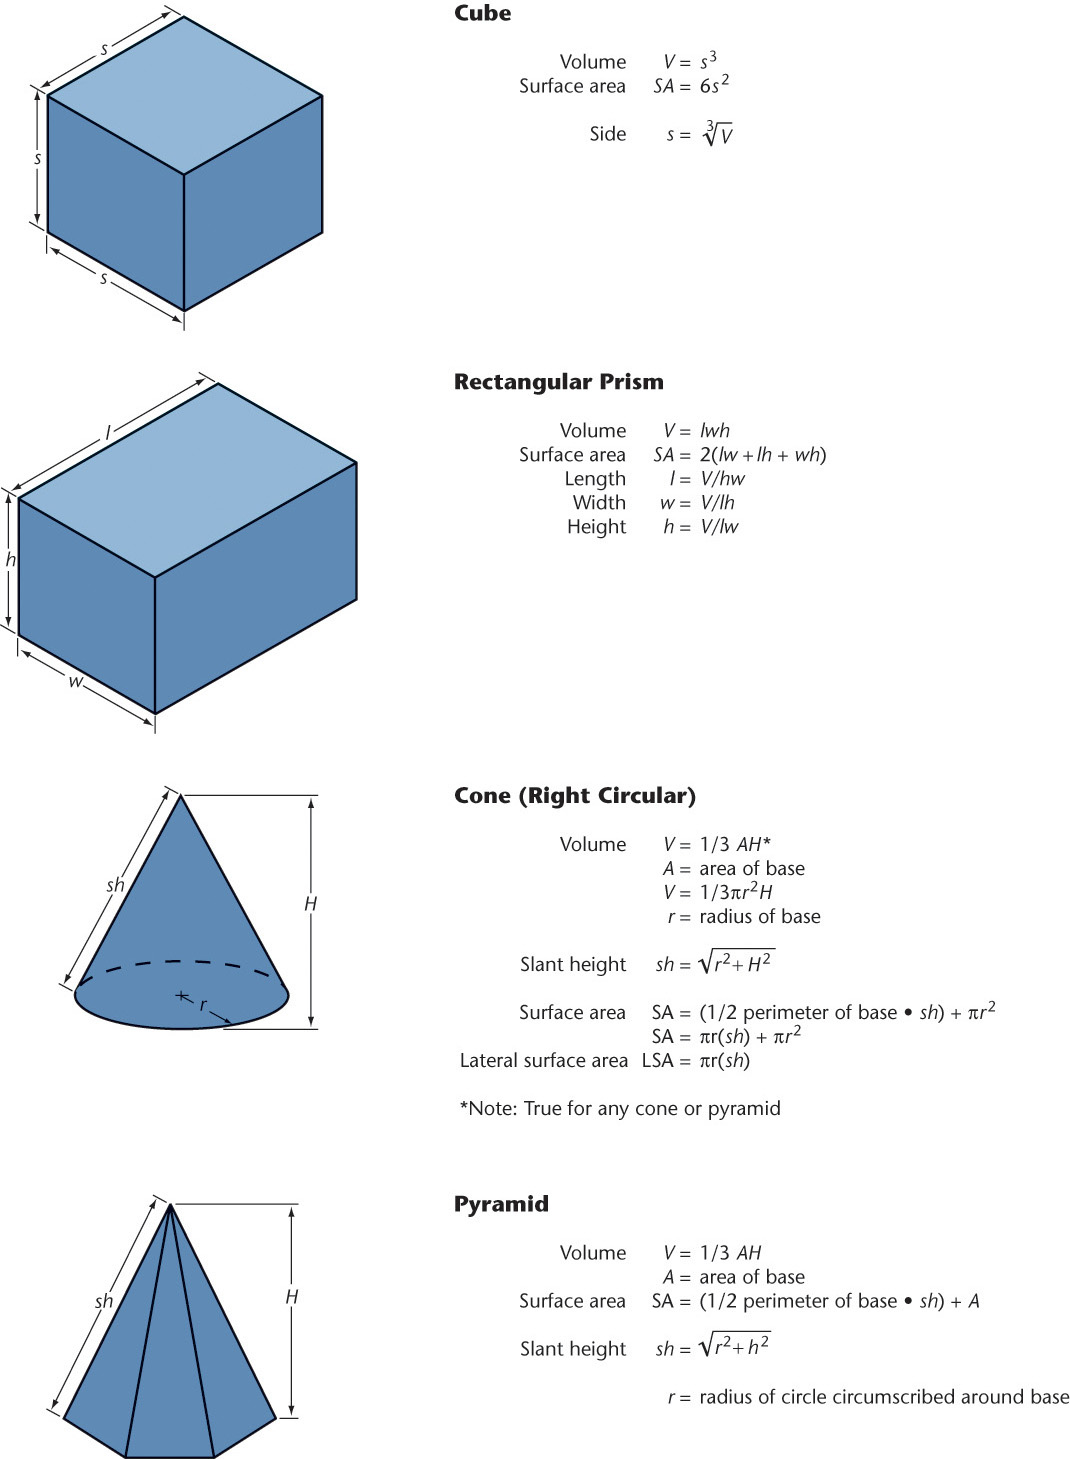 Figure shows the formulas for three dimensional shapes.